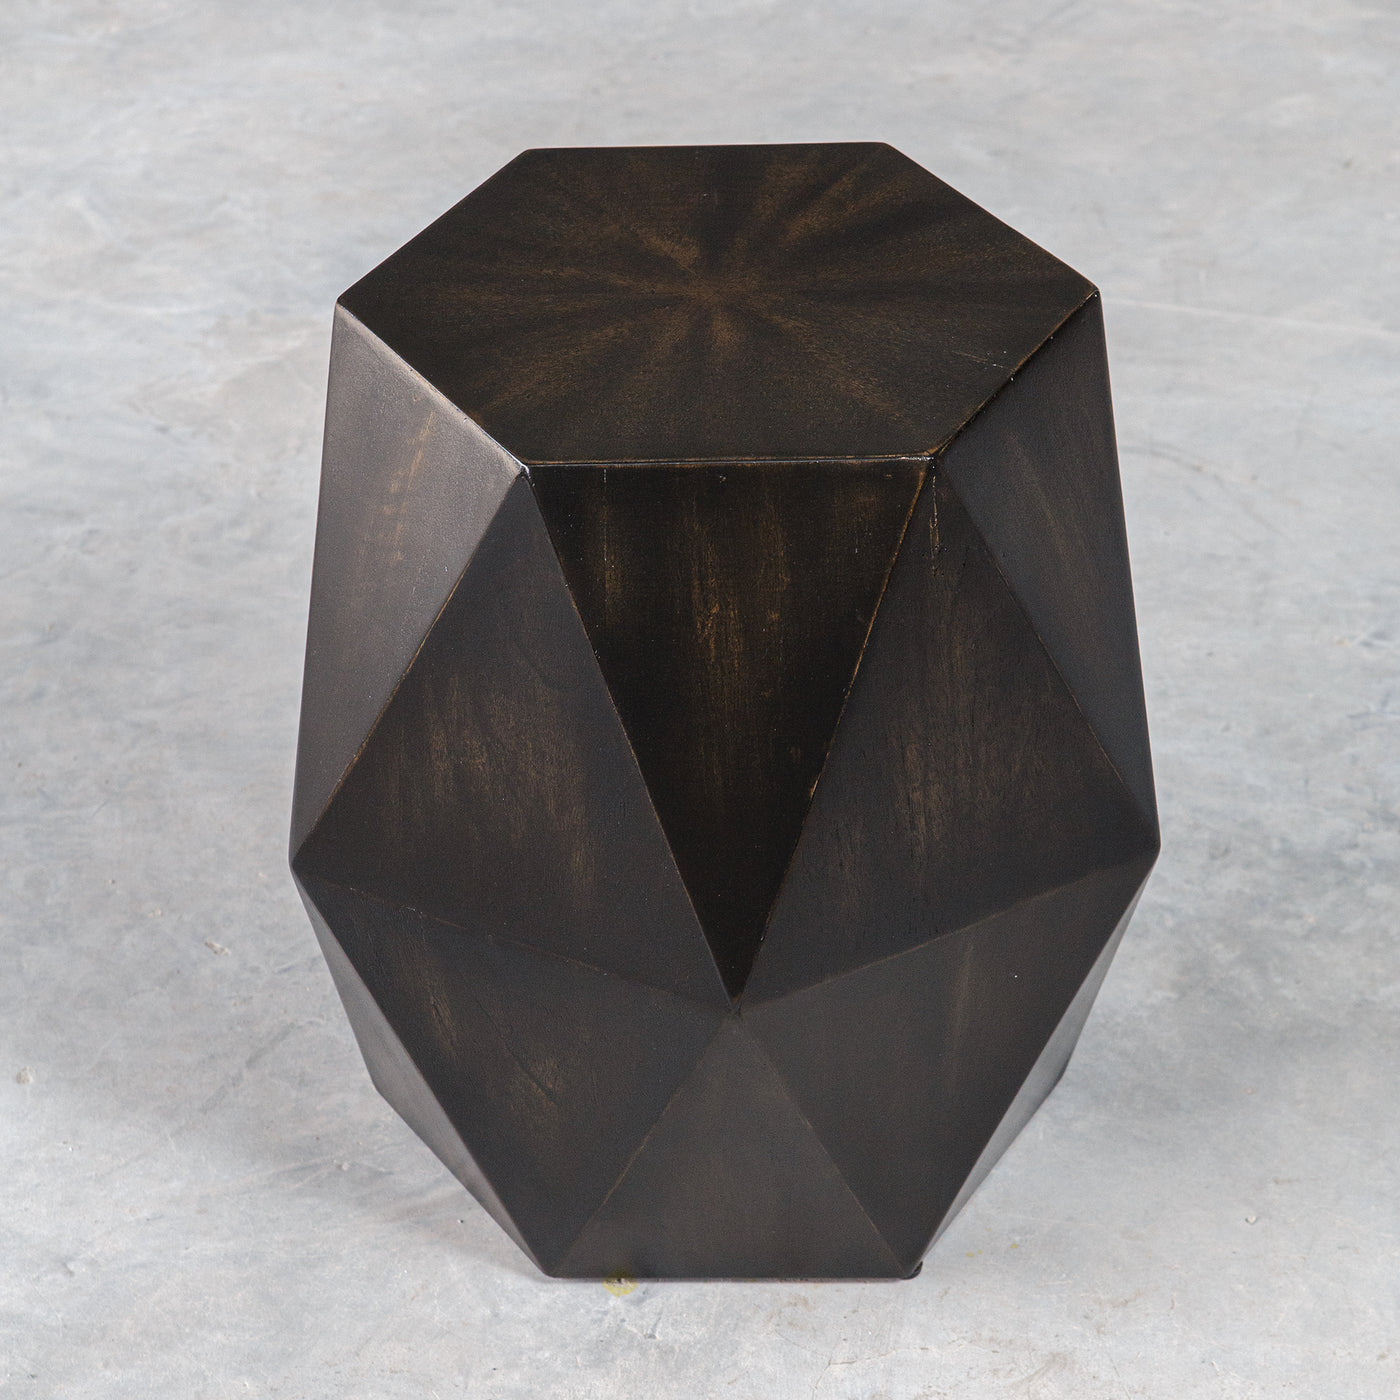 Uttermost Volker Black Geometric Accent Table – eCTURE